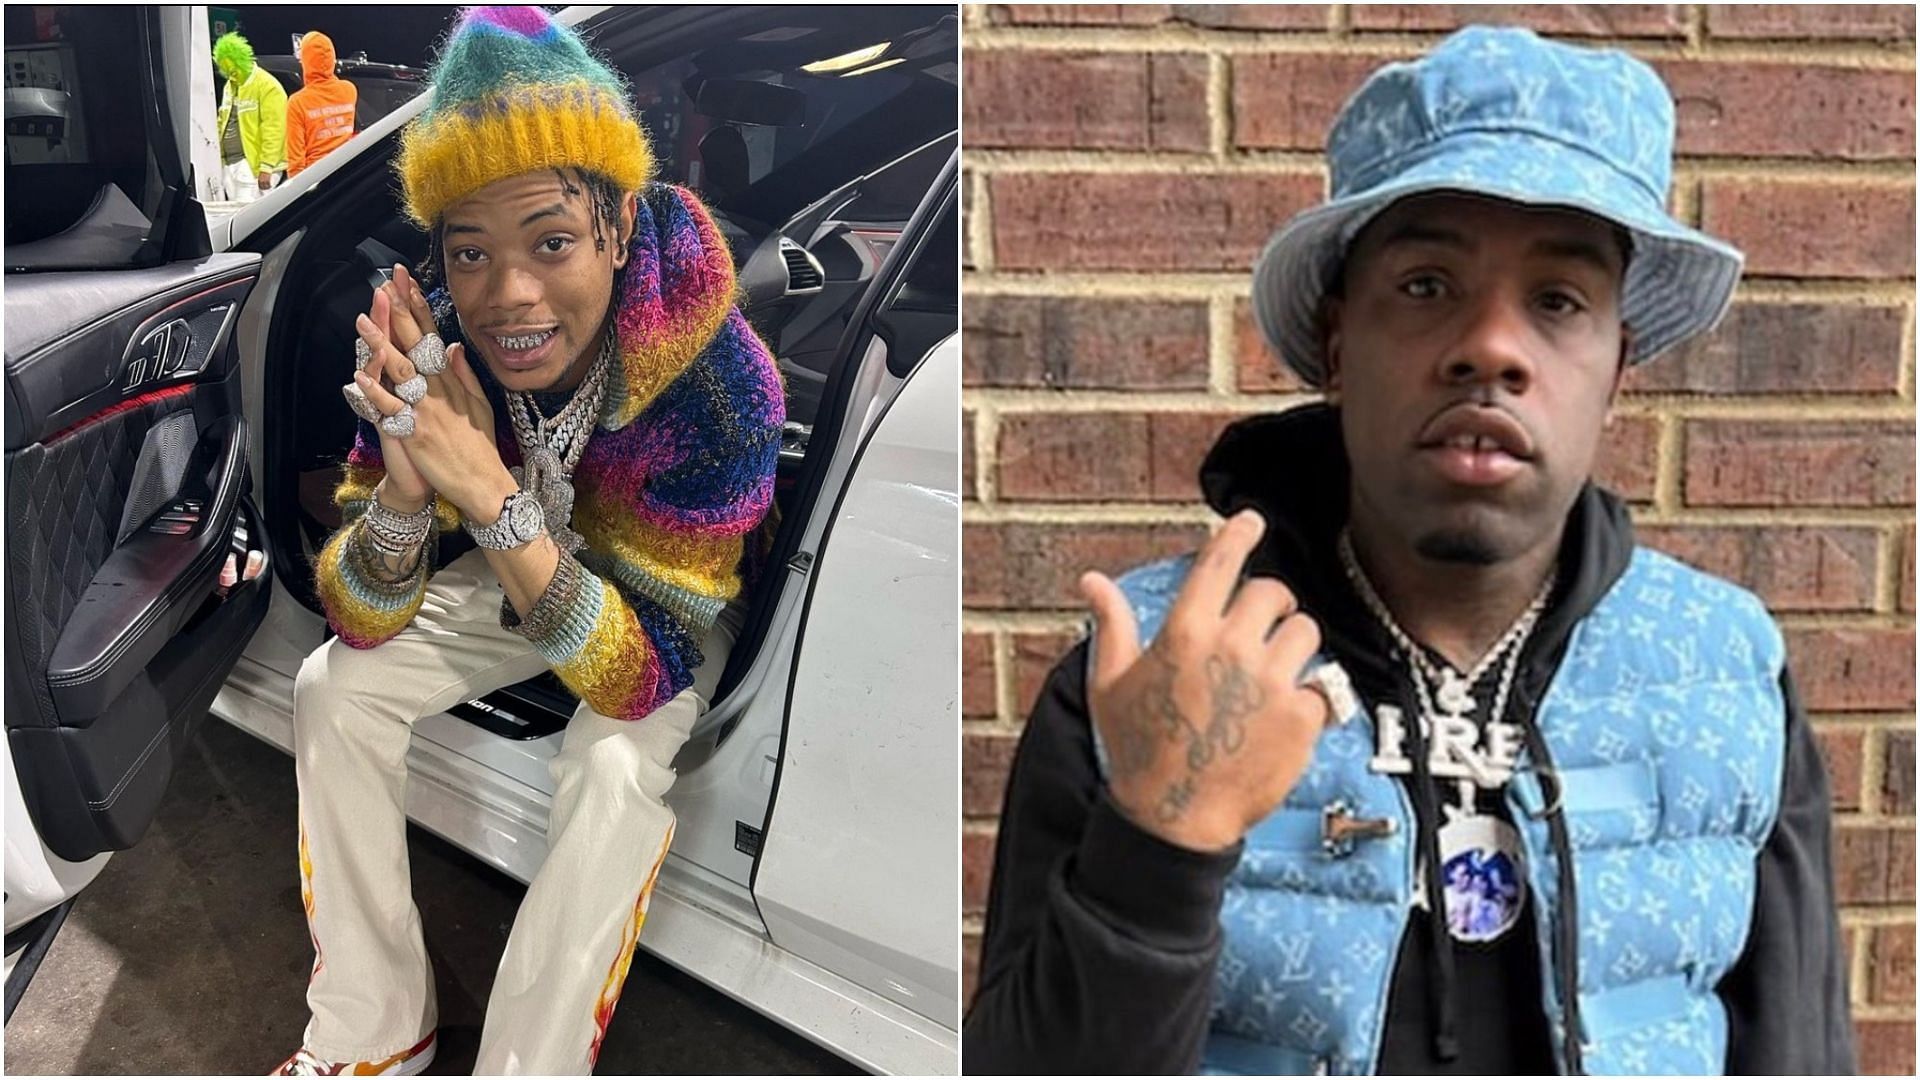 Memphis rappers Lil Migo and Grove Hero recently got into an altercation. (Images via Instagram / @lilmigo and Twitter / @raptv)